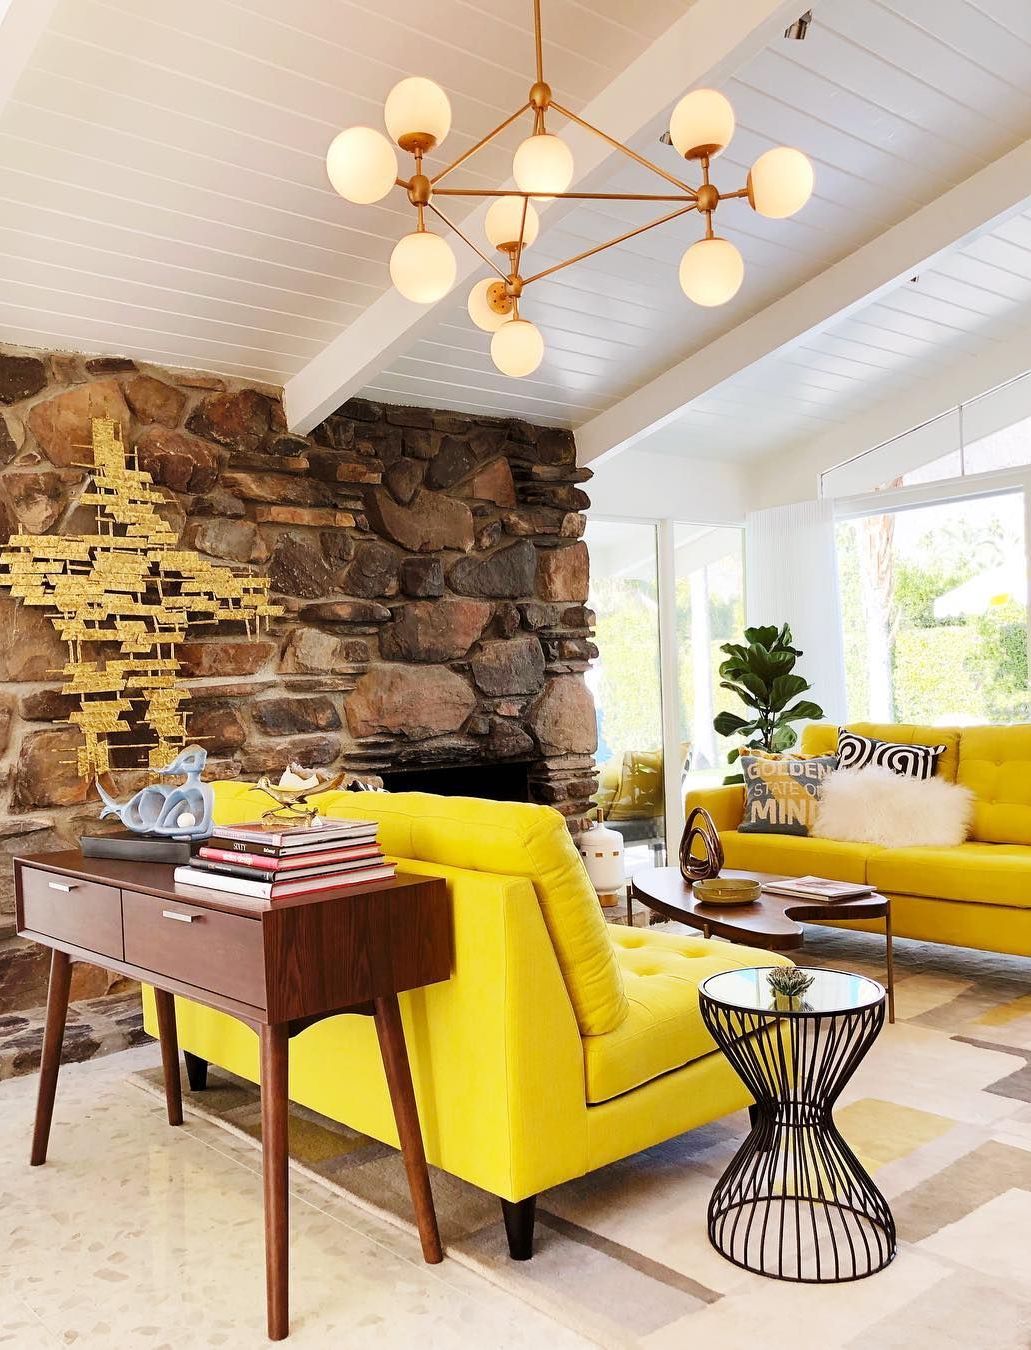 Mid-Century Modern Living Room with Stone Accent Wall via @h3kdesign